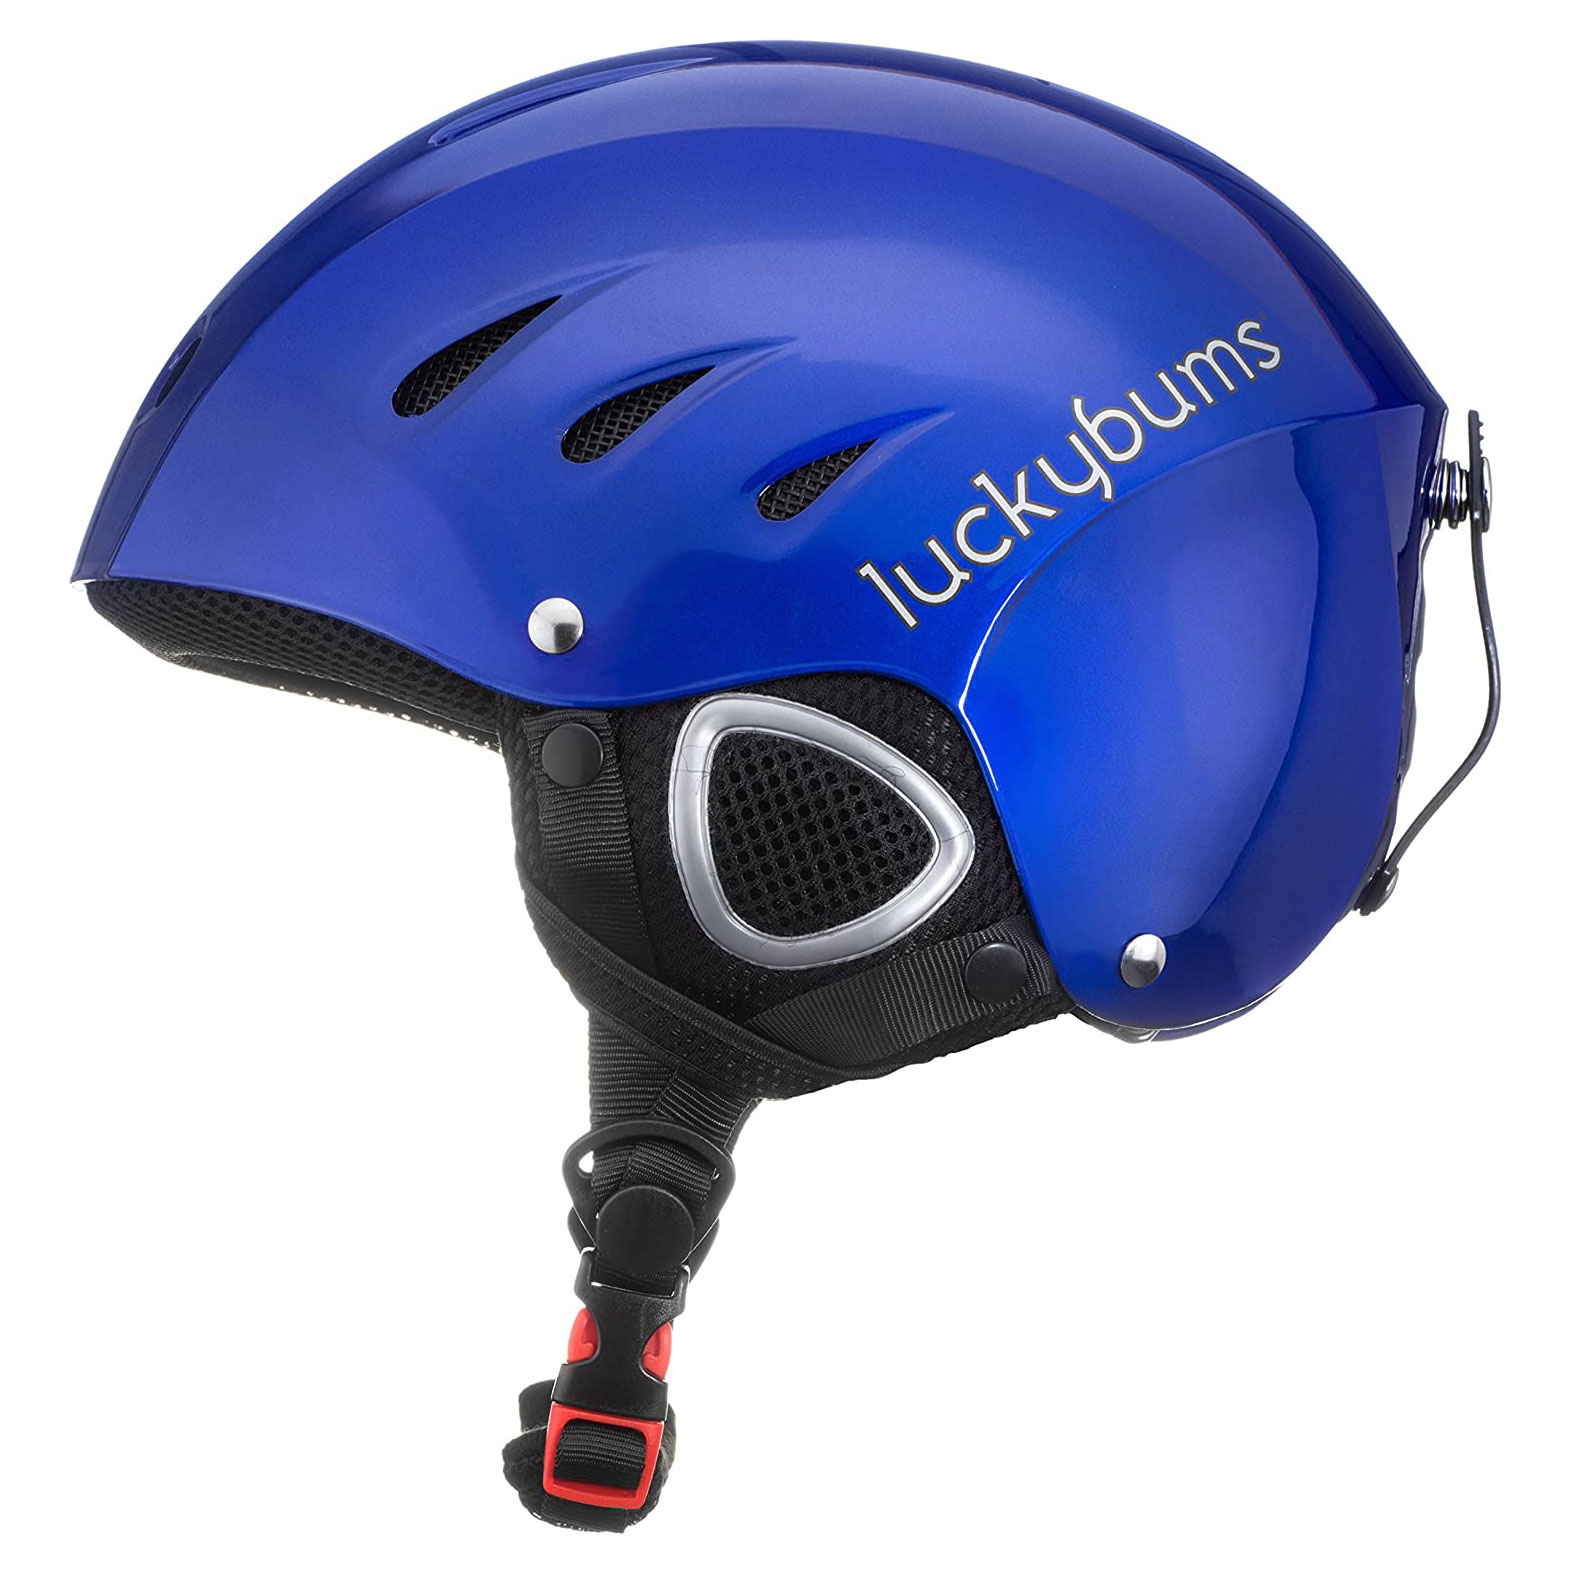 Lucky Bums Snow Sport Helmet, Blue, Large - image 1 of 7